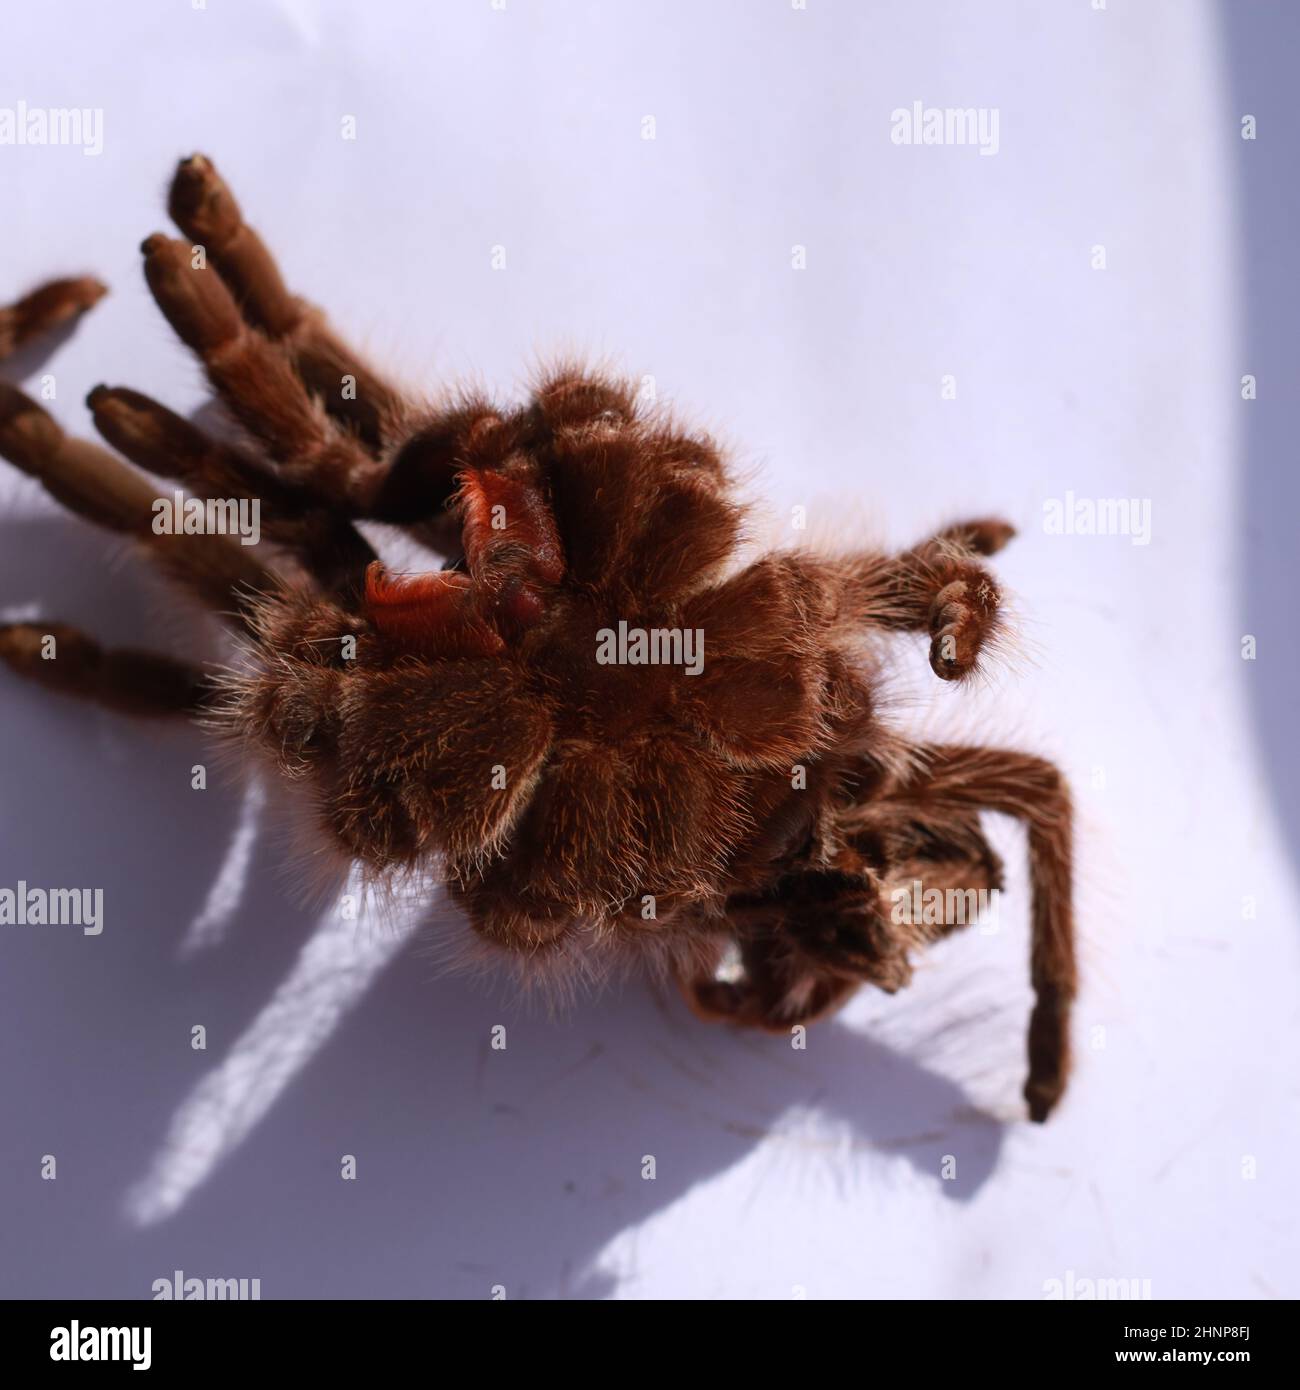 Science and Nature - Close-up of organic remains of Tarantula arachnid skin moult Stock Photo